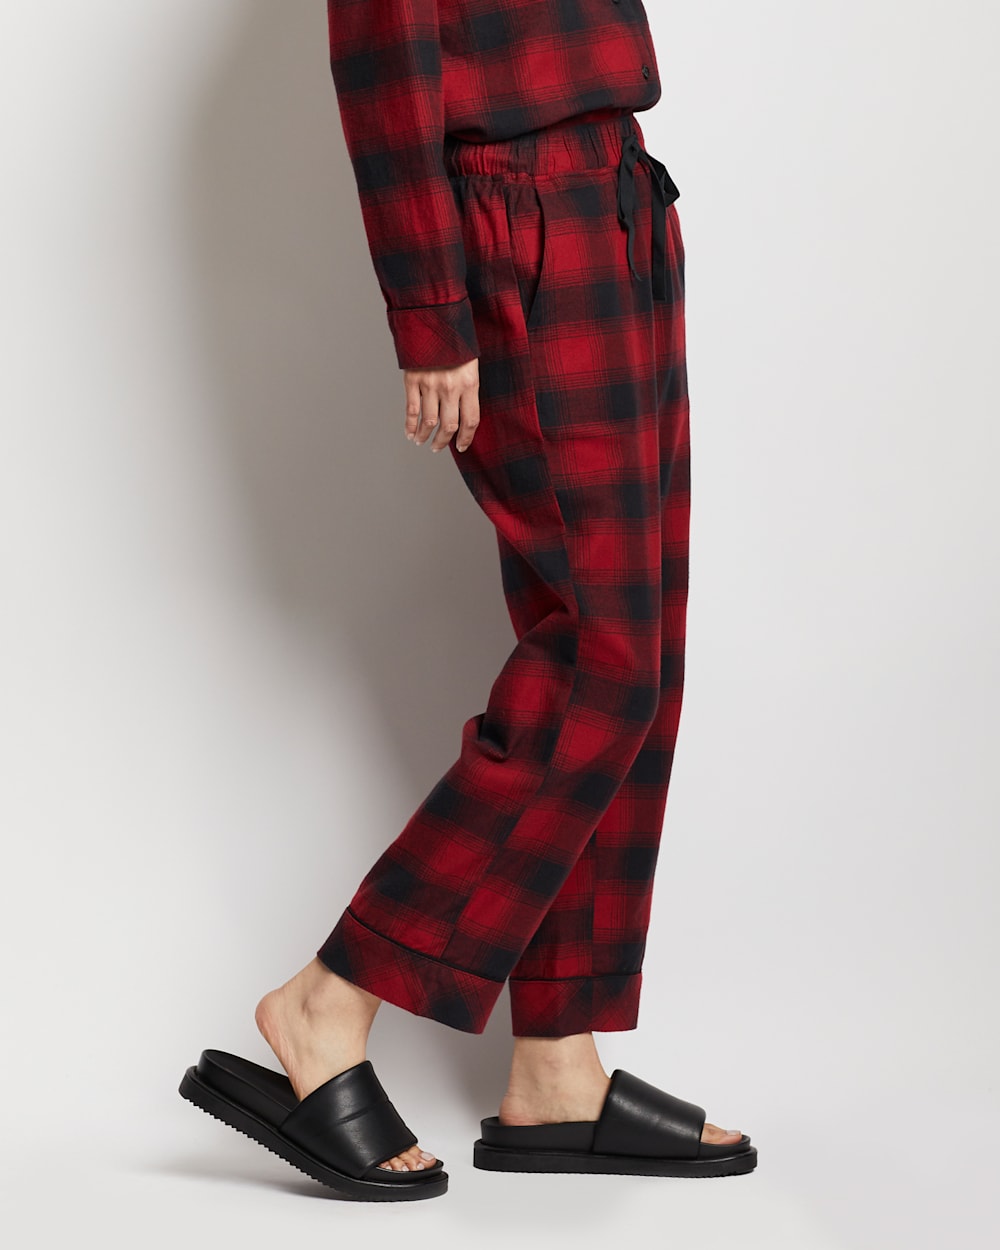 ALTERNATE VIEW OF WOMEN'S PAJAMA PANTS IN RED/BLACK OMBRE image number 4